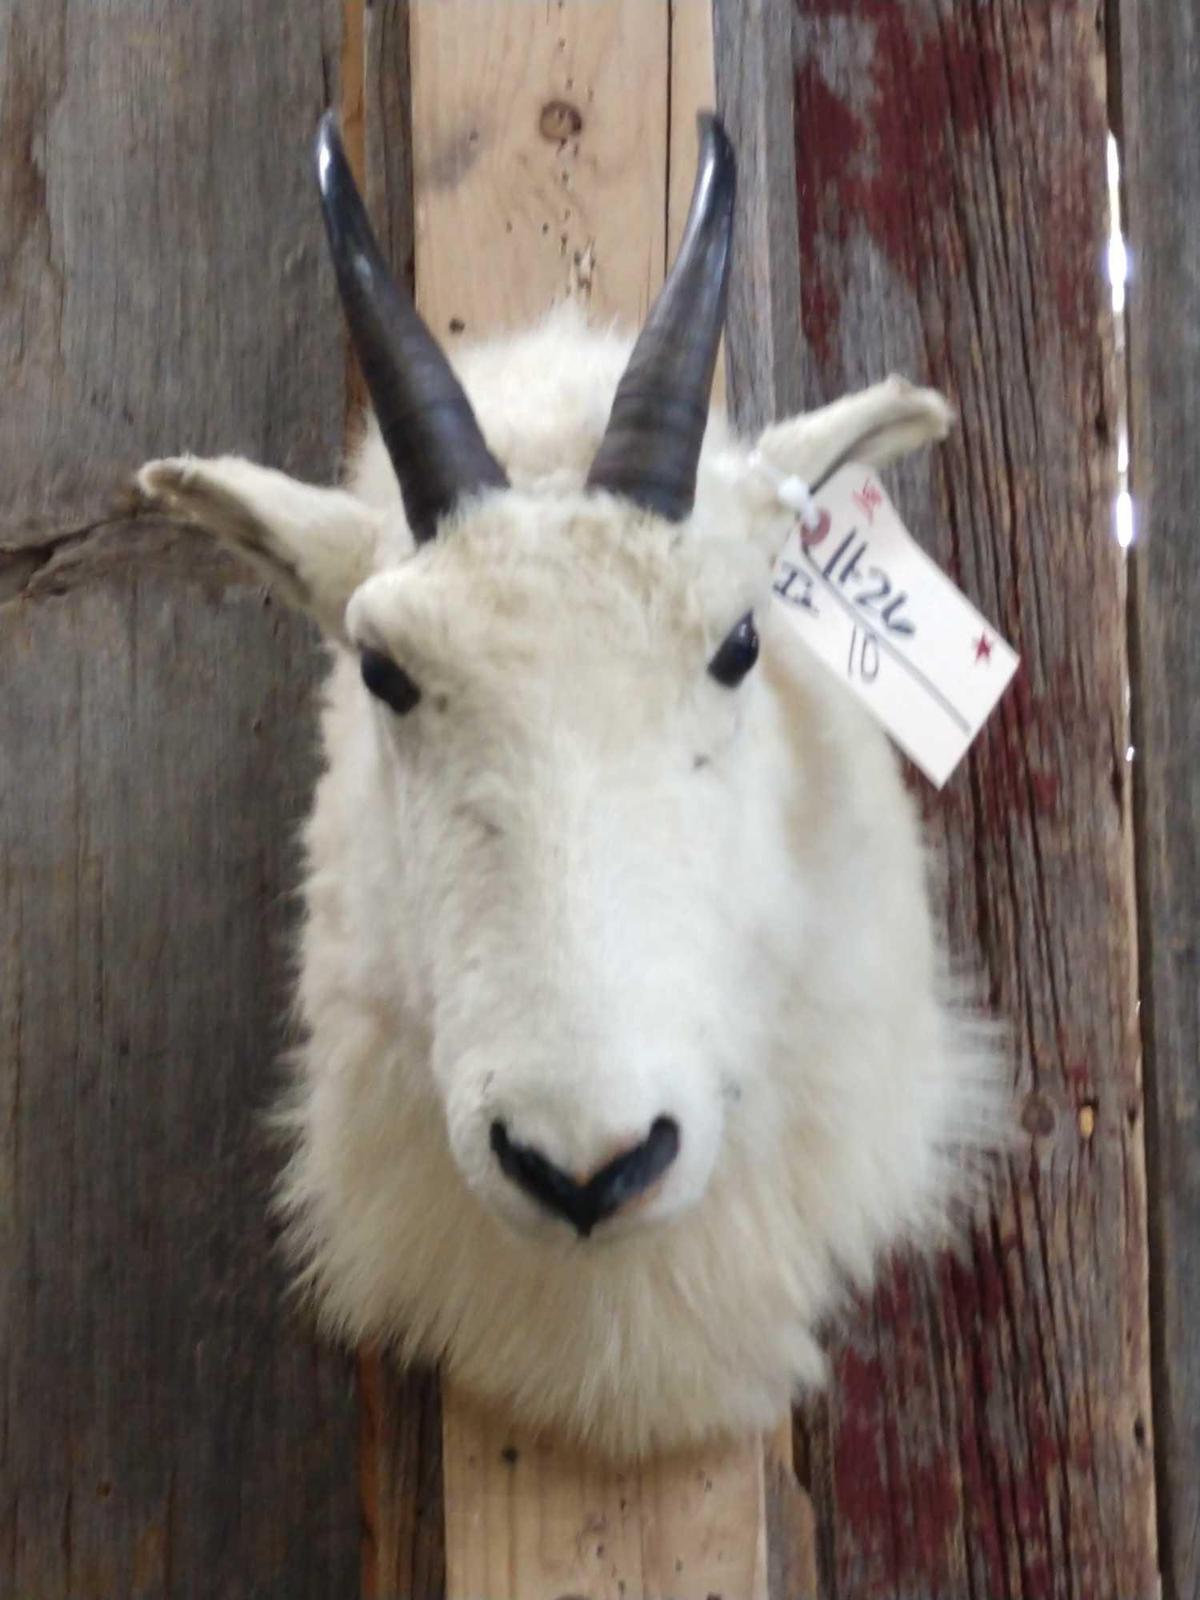 Mountain Goat Shoulder Mount Taxidermy